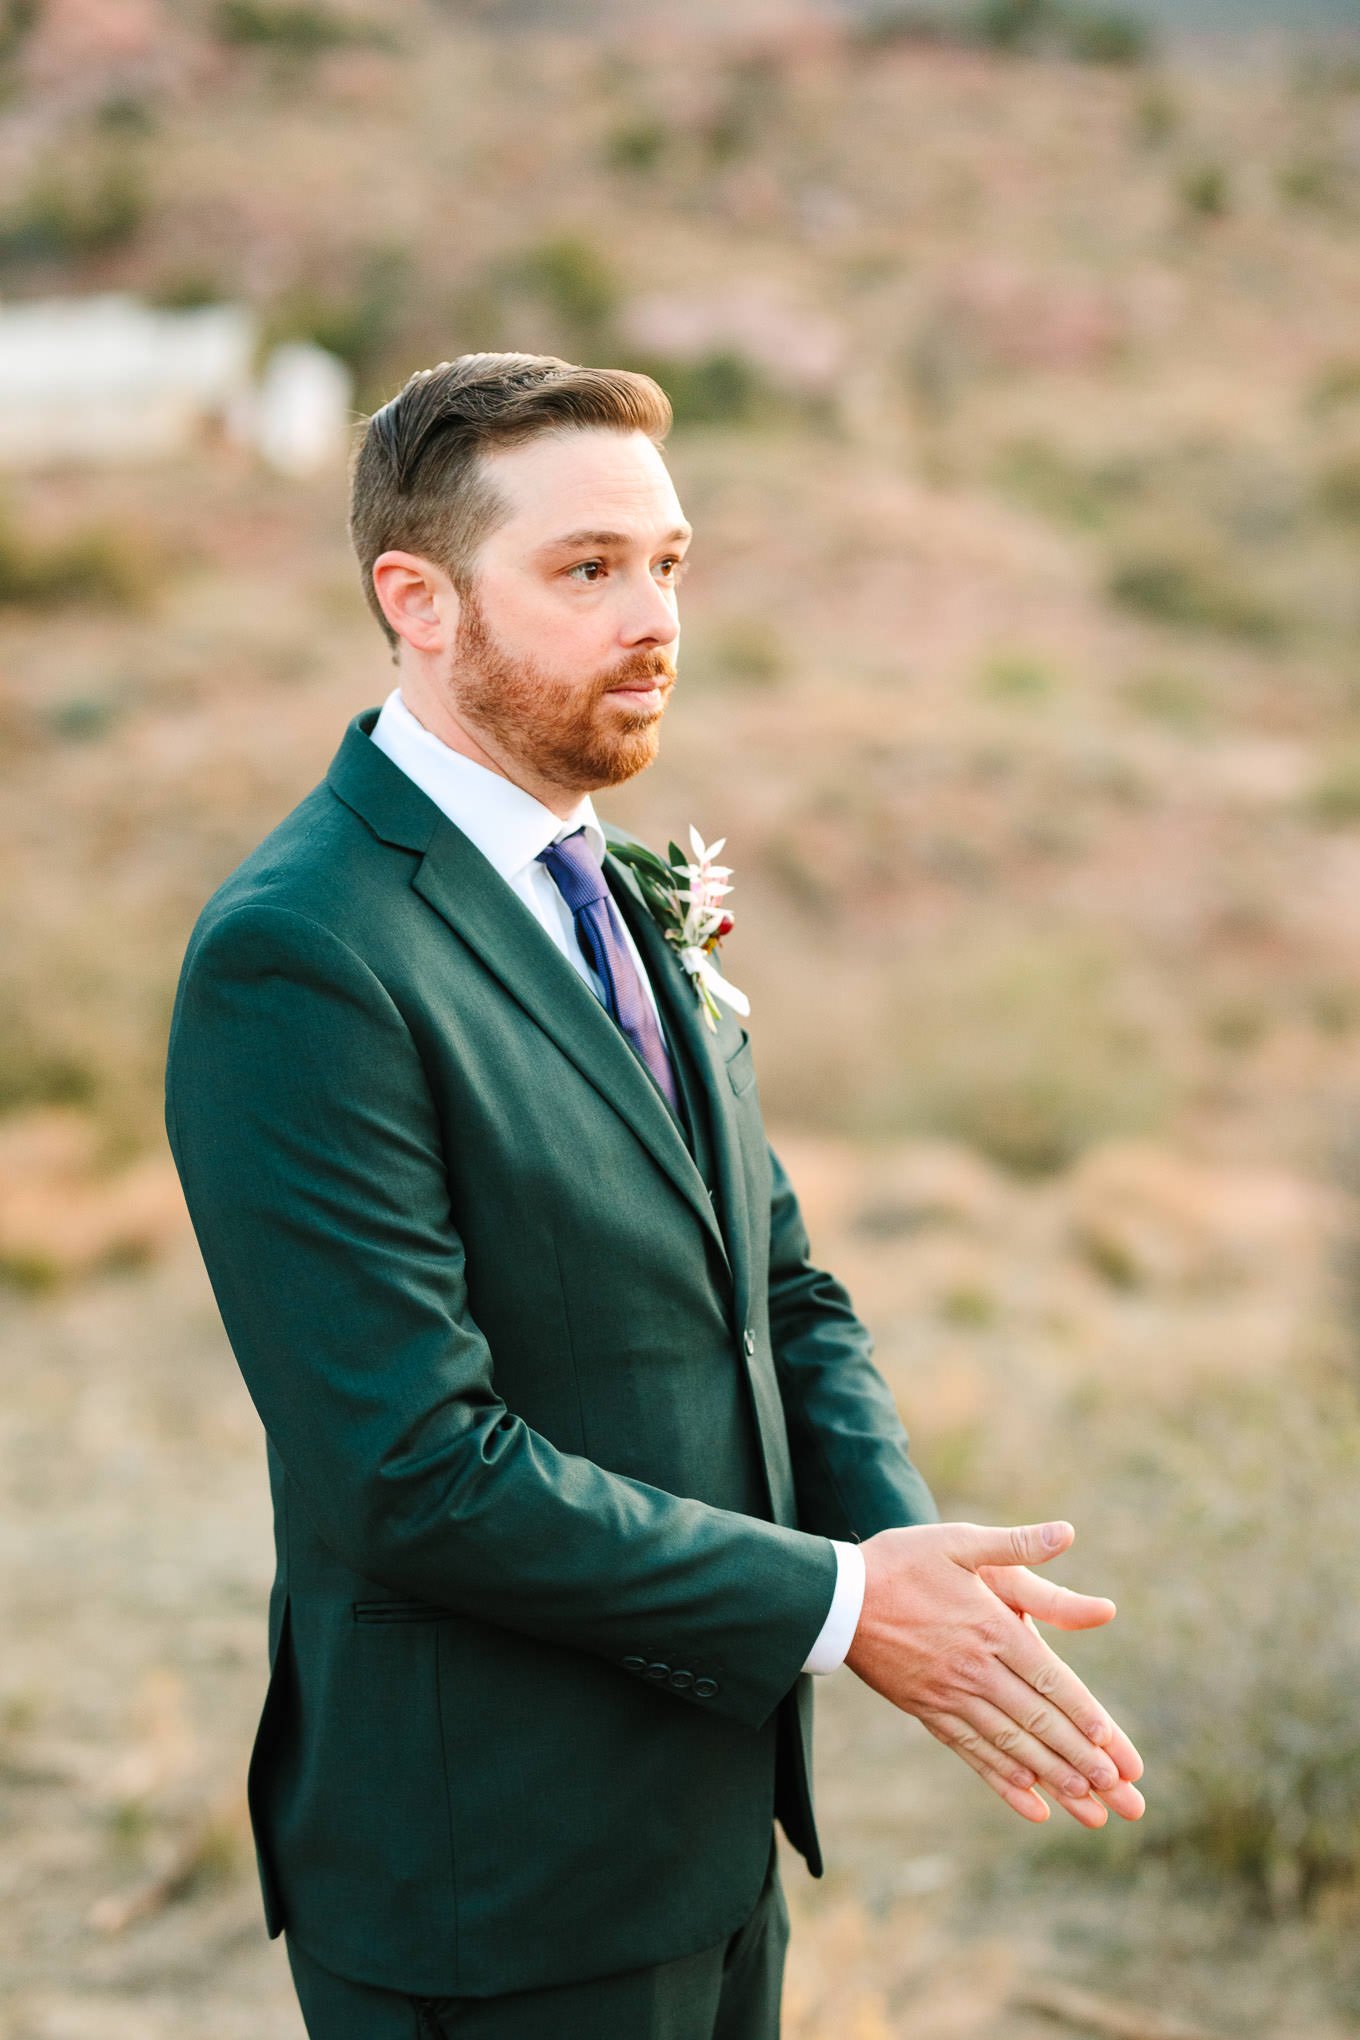 Groom awaiting first look | Zion Under Canvas Elopement at Sunrise | Colorful adventure elopement photography | #utahelopement #zionelopement #zionwedding #undercanvaszion #sunriseelopement  Source: Mary Costa Photography | Los Angeles